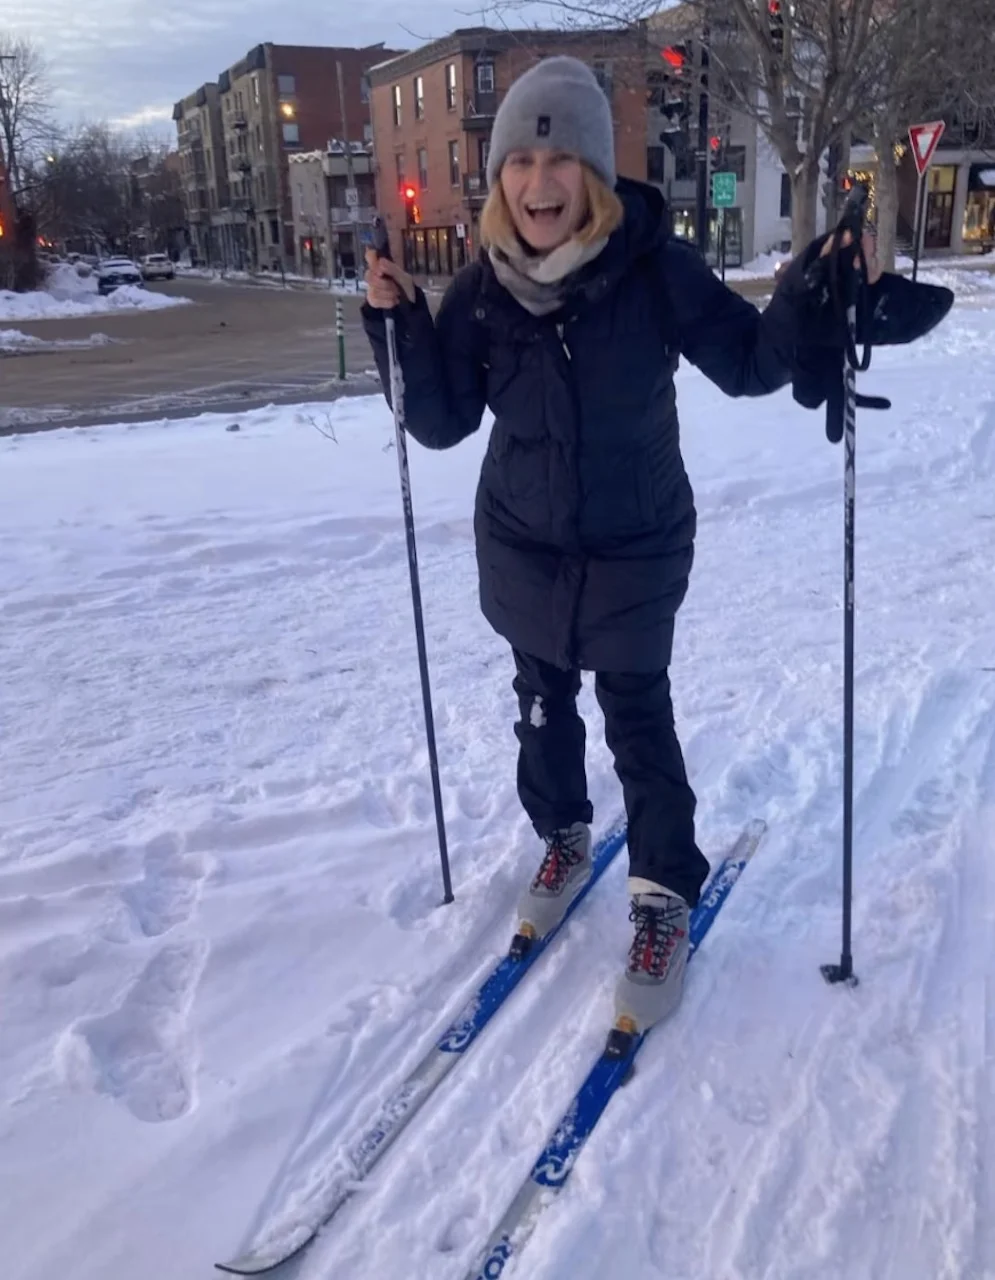 Quebec skiing/Submitted by Raluca Kirk via CBC